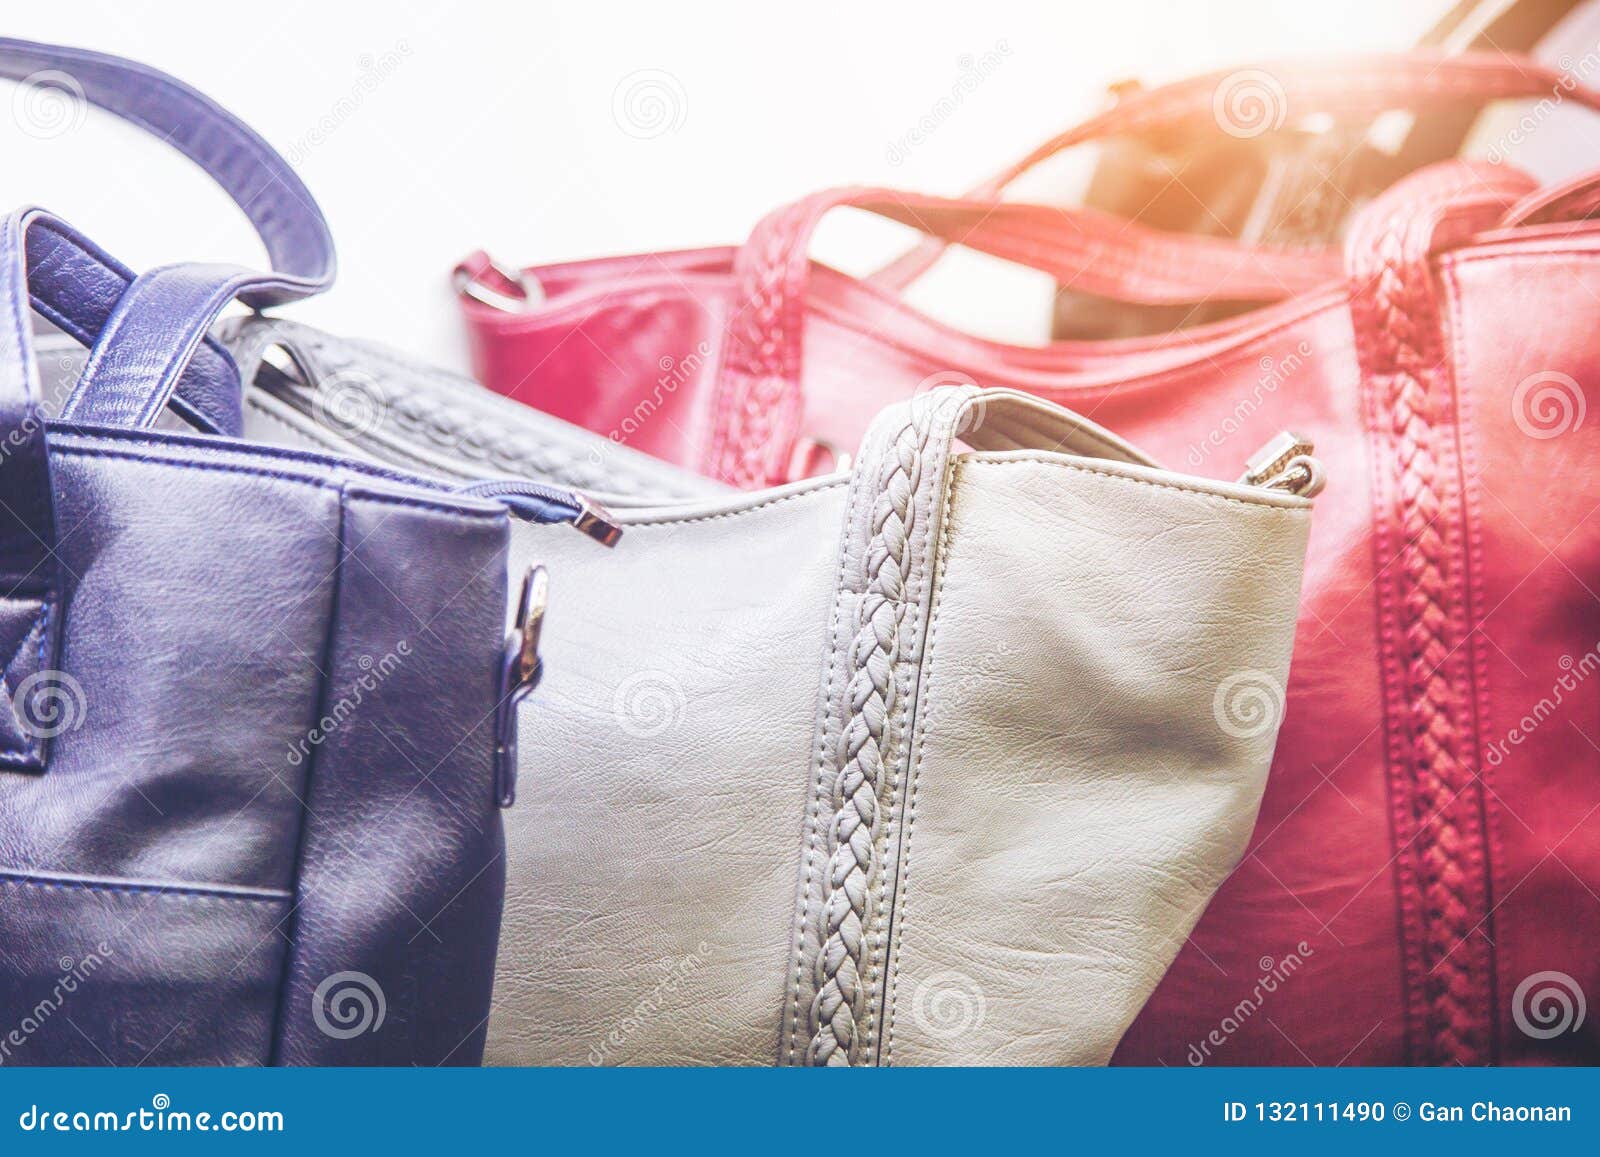 Fashionable and High Style Expensive Female Bag Stock Photo - Image of ...